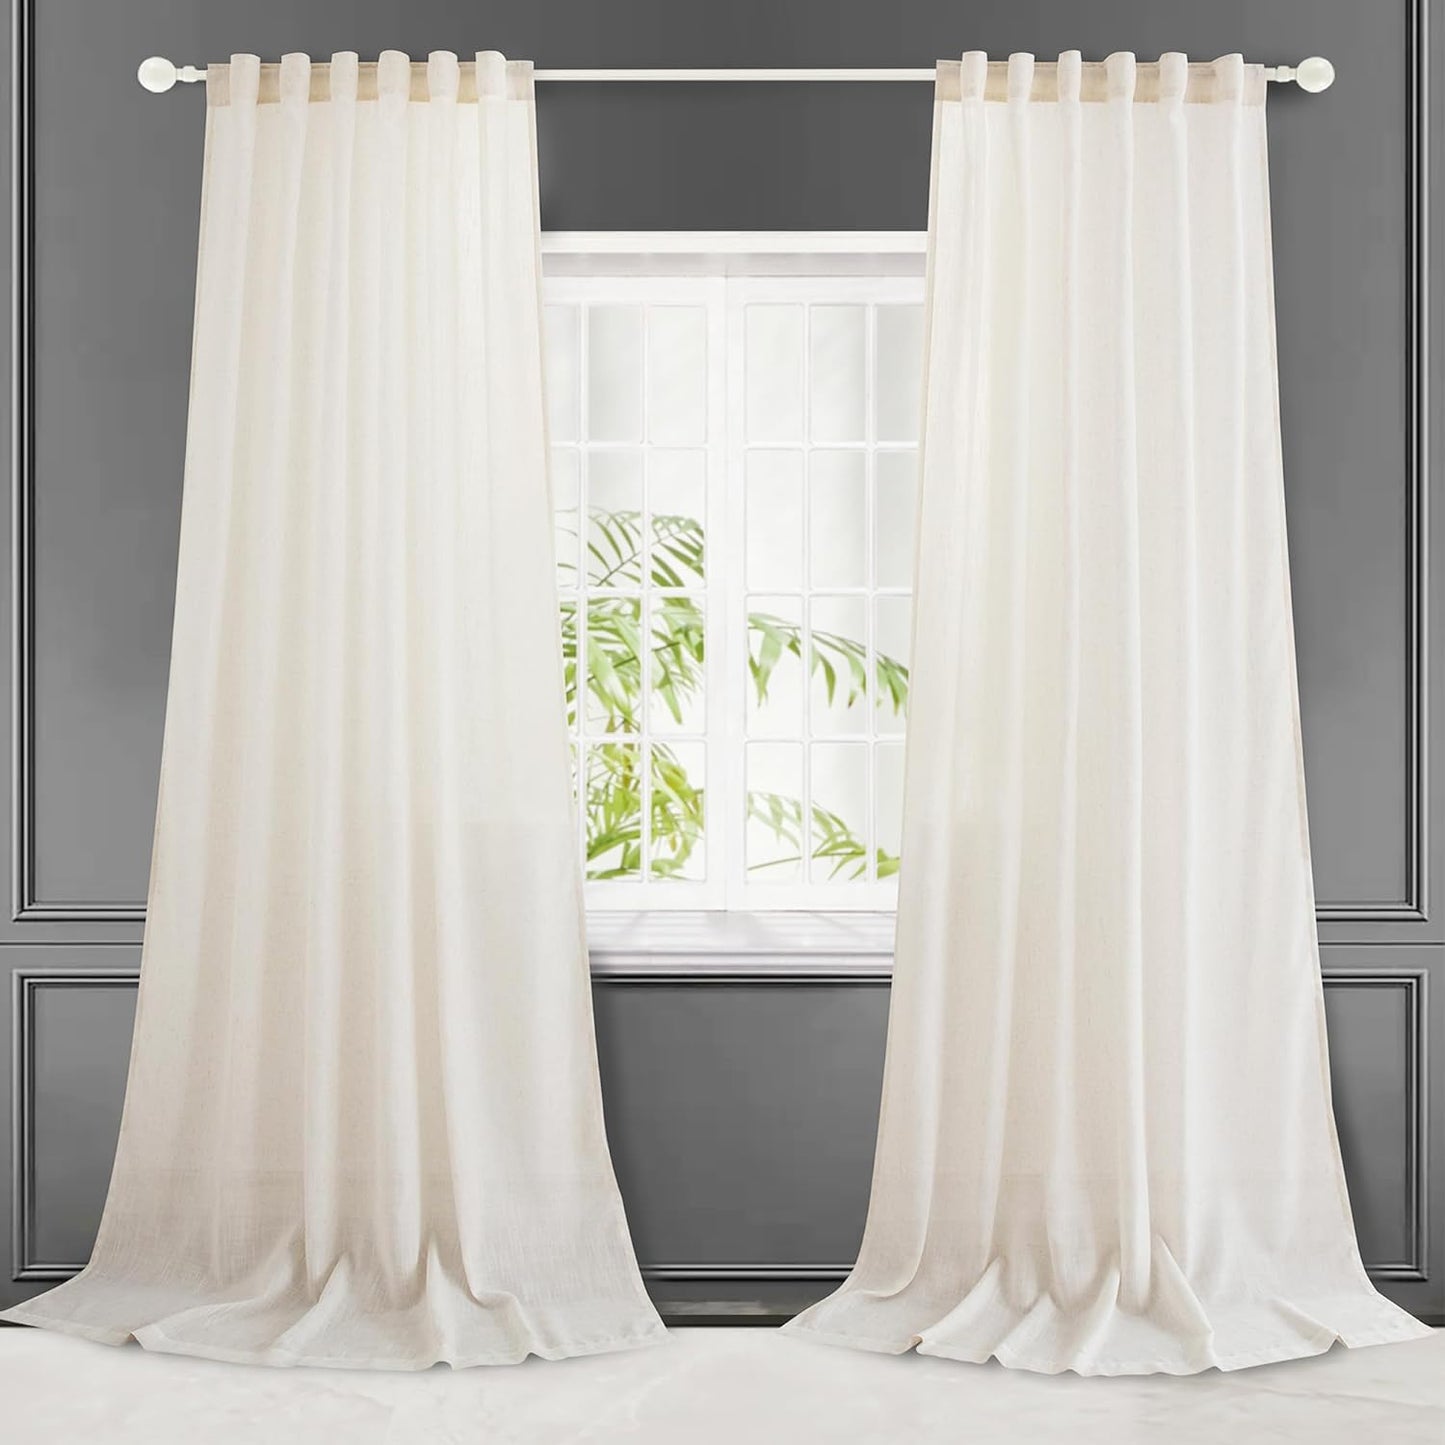 Pure White Linen Curtains 84 Inch Long Back Tab Loop Pocket Drape Cotton Textured Curtains 2 Panels Set Light Filtering Semi Sheer Linen Curtain for Living Room Bedroom Farmhouse 52X84  Hoydumuia Natural 52"X84" 